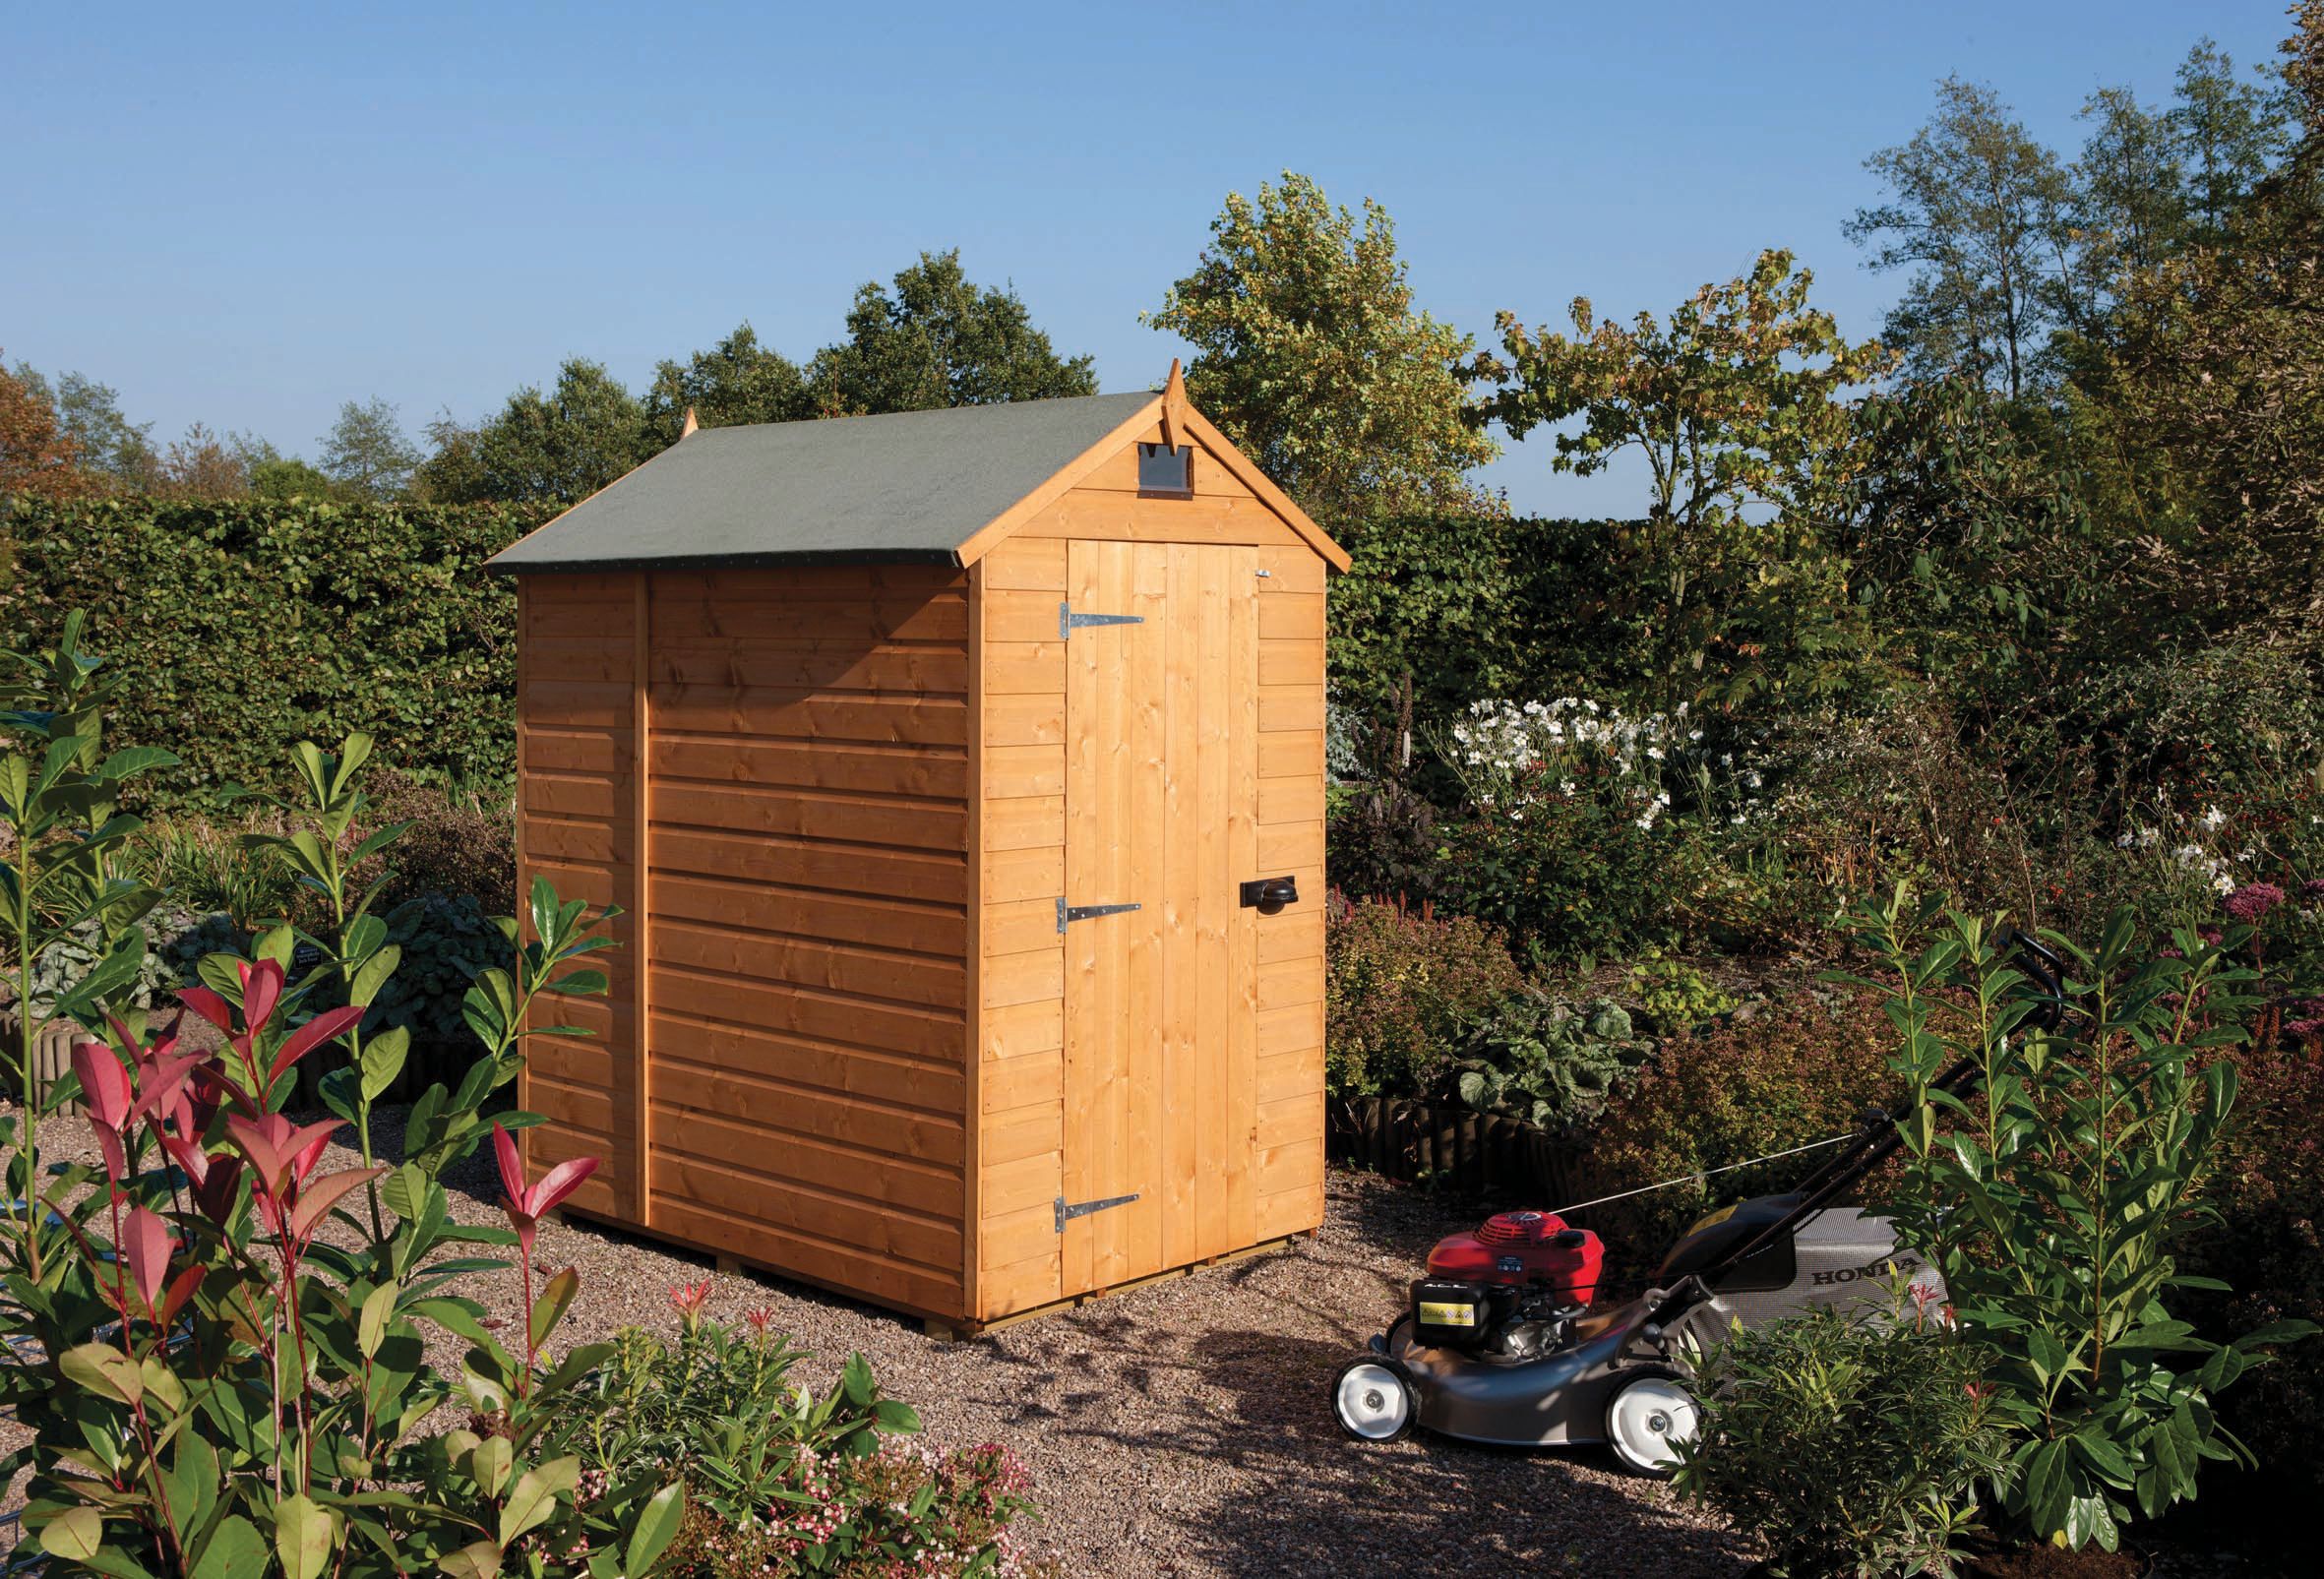 Rowlinson 7 x 5ft Security Shed with Apex Window